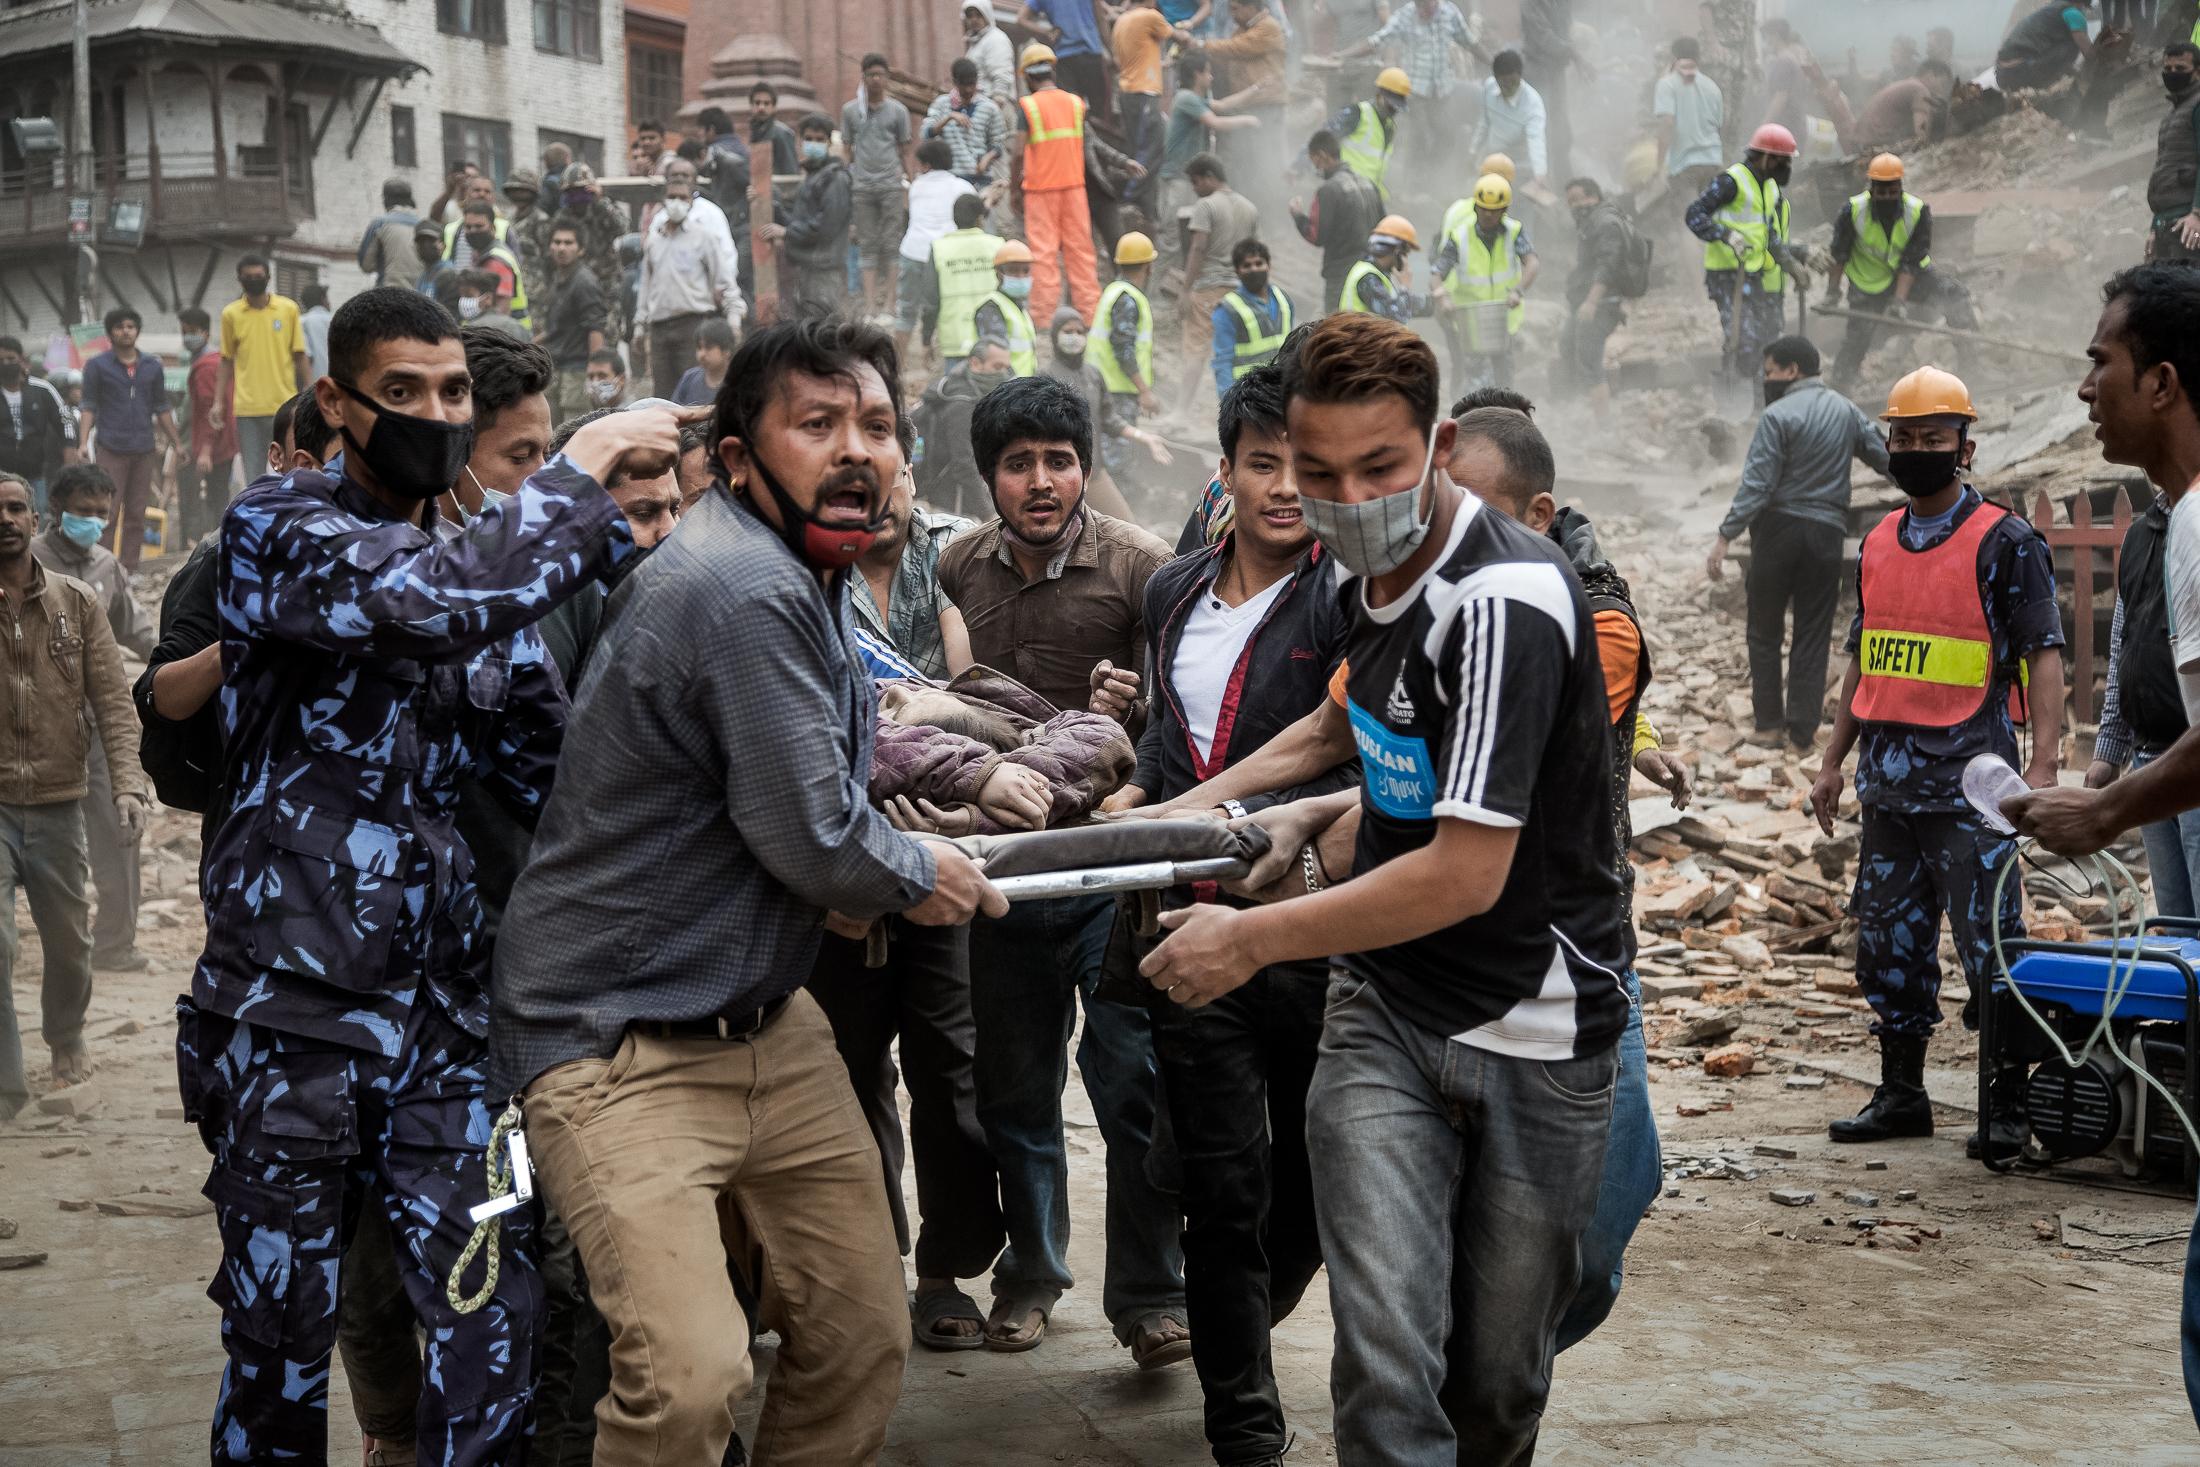 When the Earth Shook Nepal - KATHMANDU, NEPAL - APRIL 25: Emergency rescue workers and...